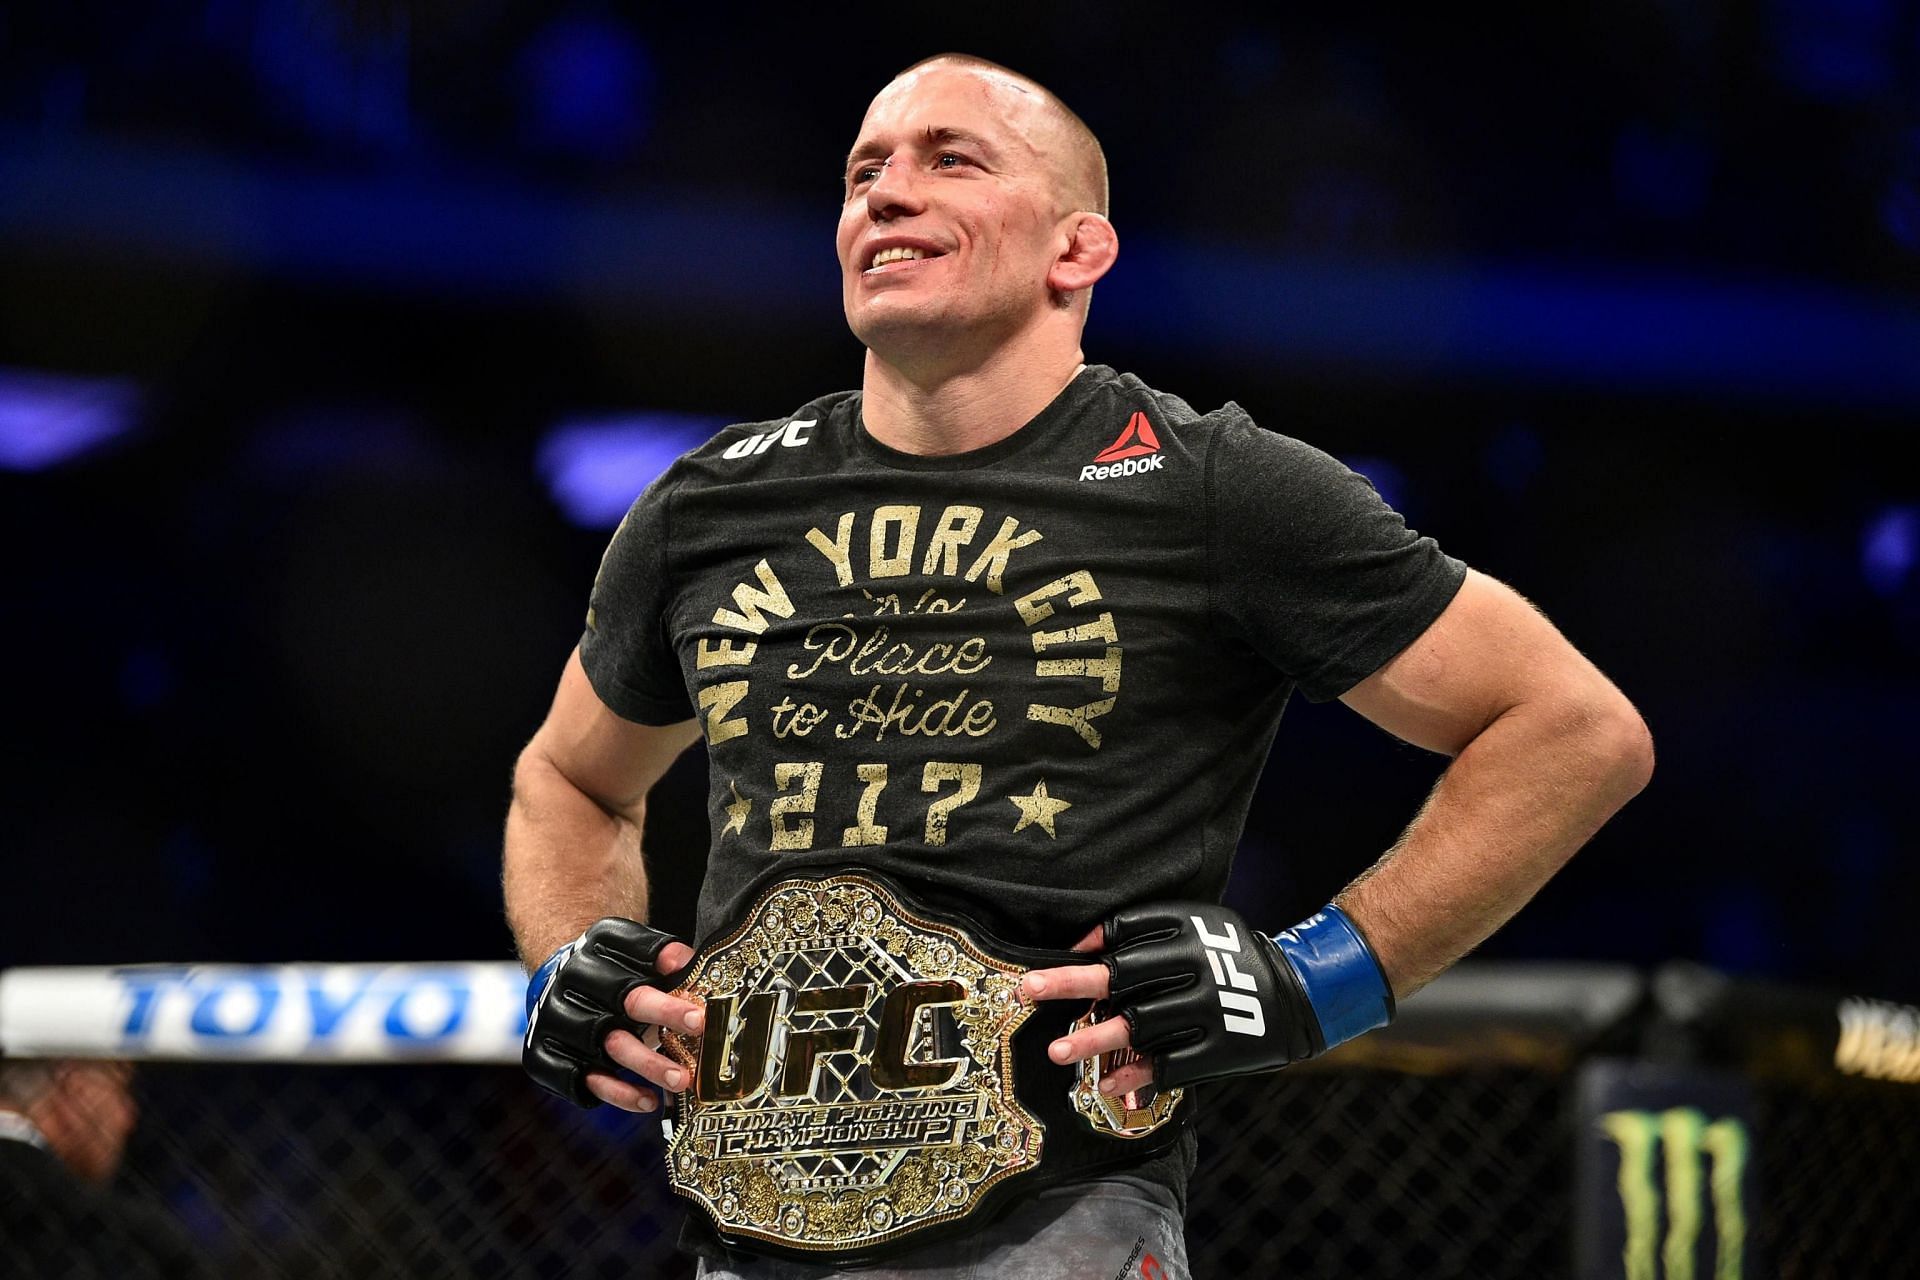 The great Georges St-Pierre&#039;s fighting style garnered plenty of unfair criticism during his title reign